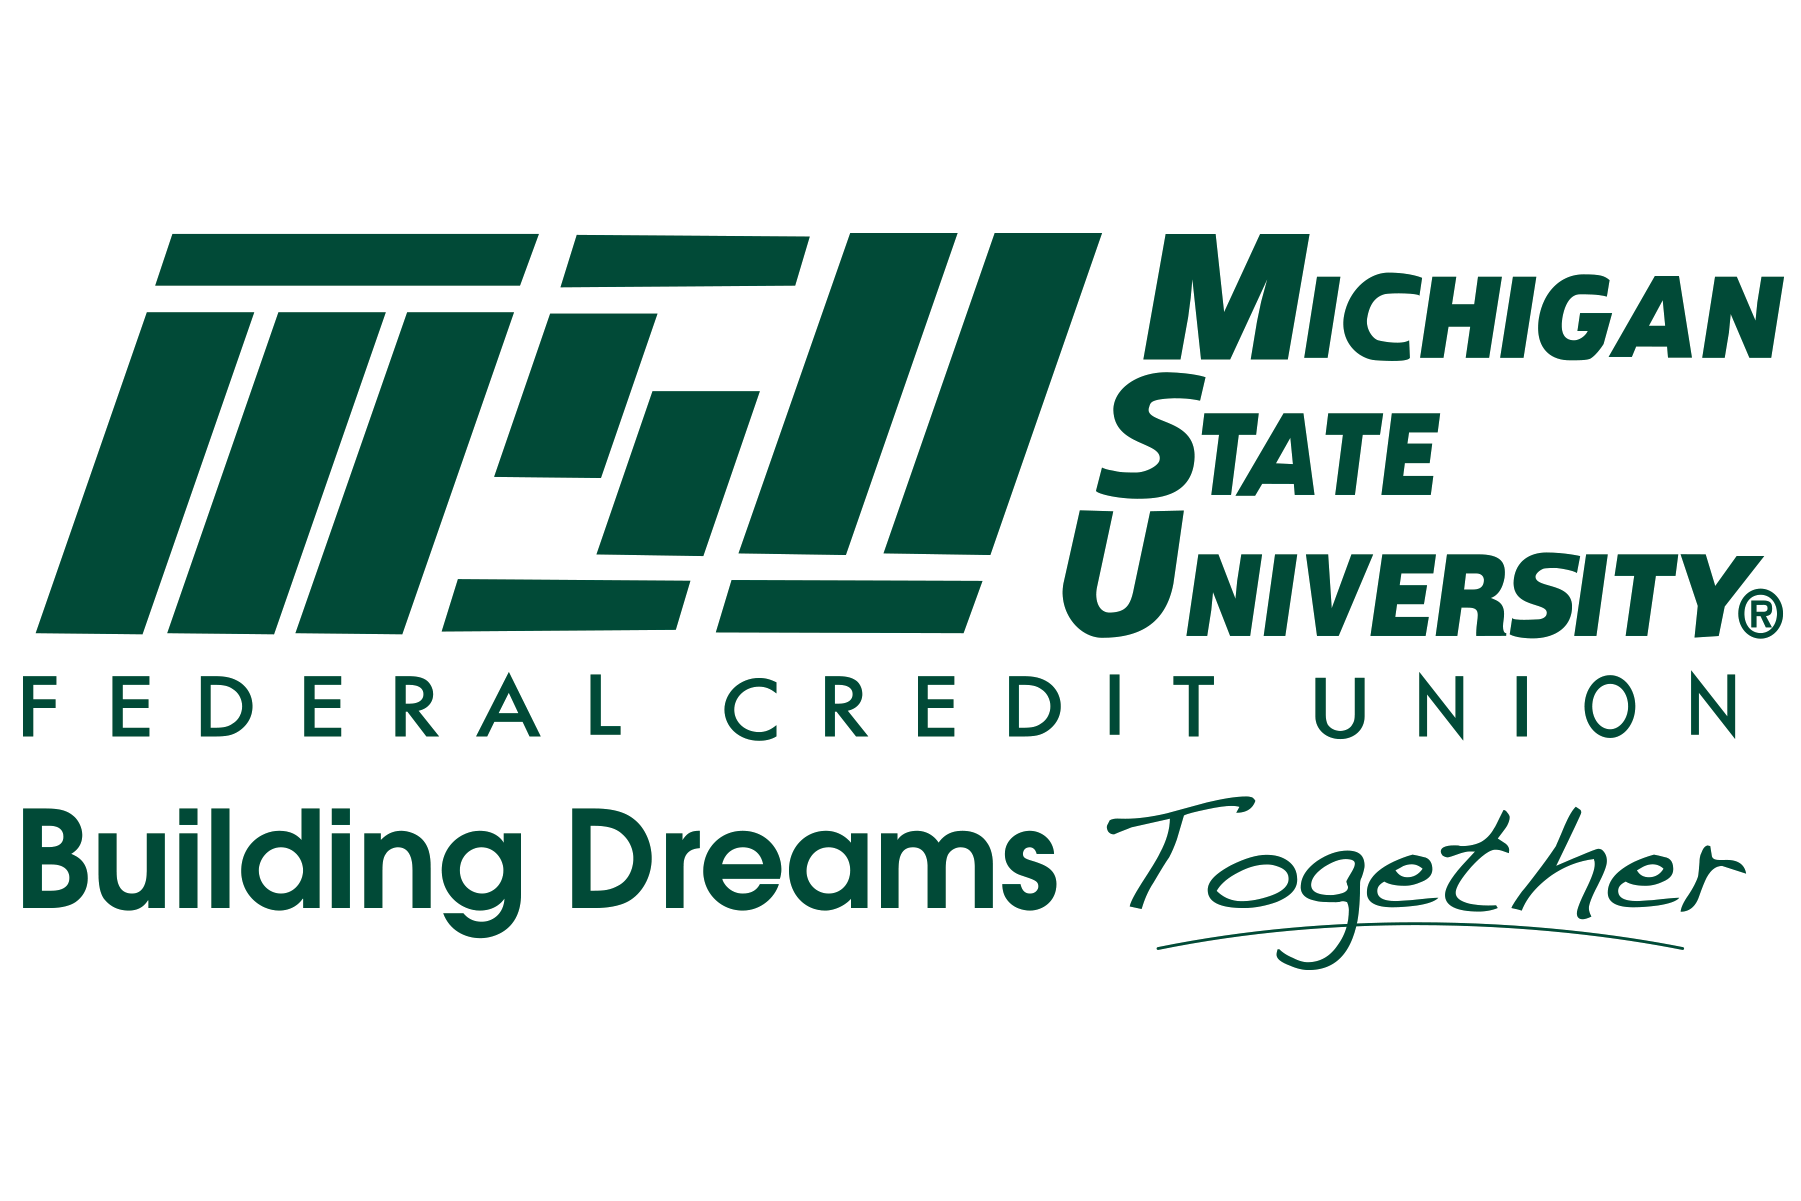  - Logo - https://s41078.pcdn.co/wp-content/uploads/2020/05/MSU-Federal-Credit-Union_Internal-Comms-Team_1-to-9.png